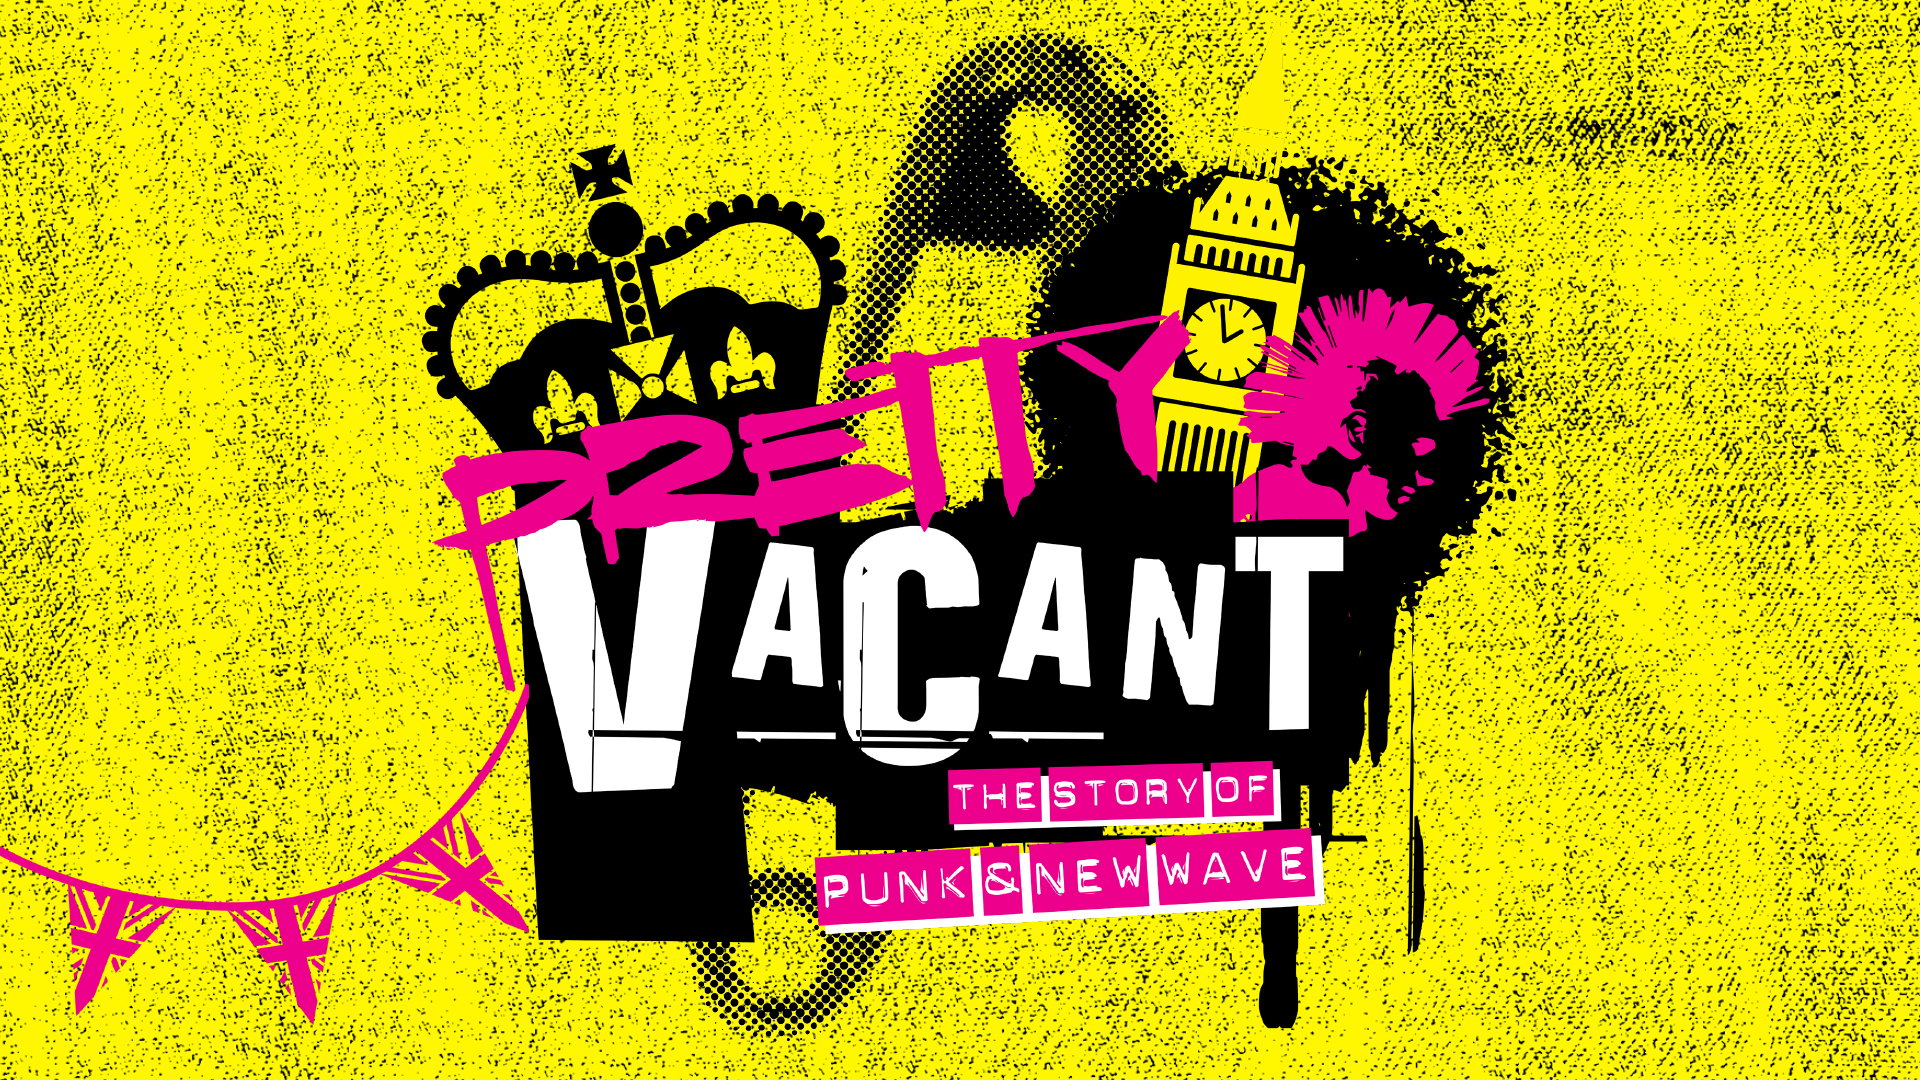 Pretty Vacant logo with a yellow background with an image of Big Ben and a safety pin